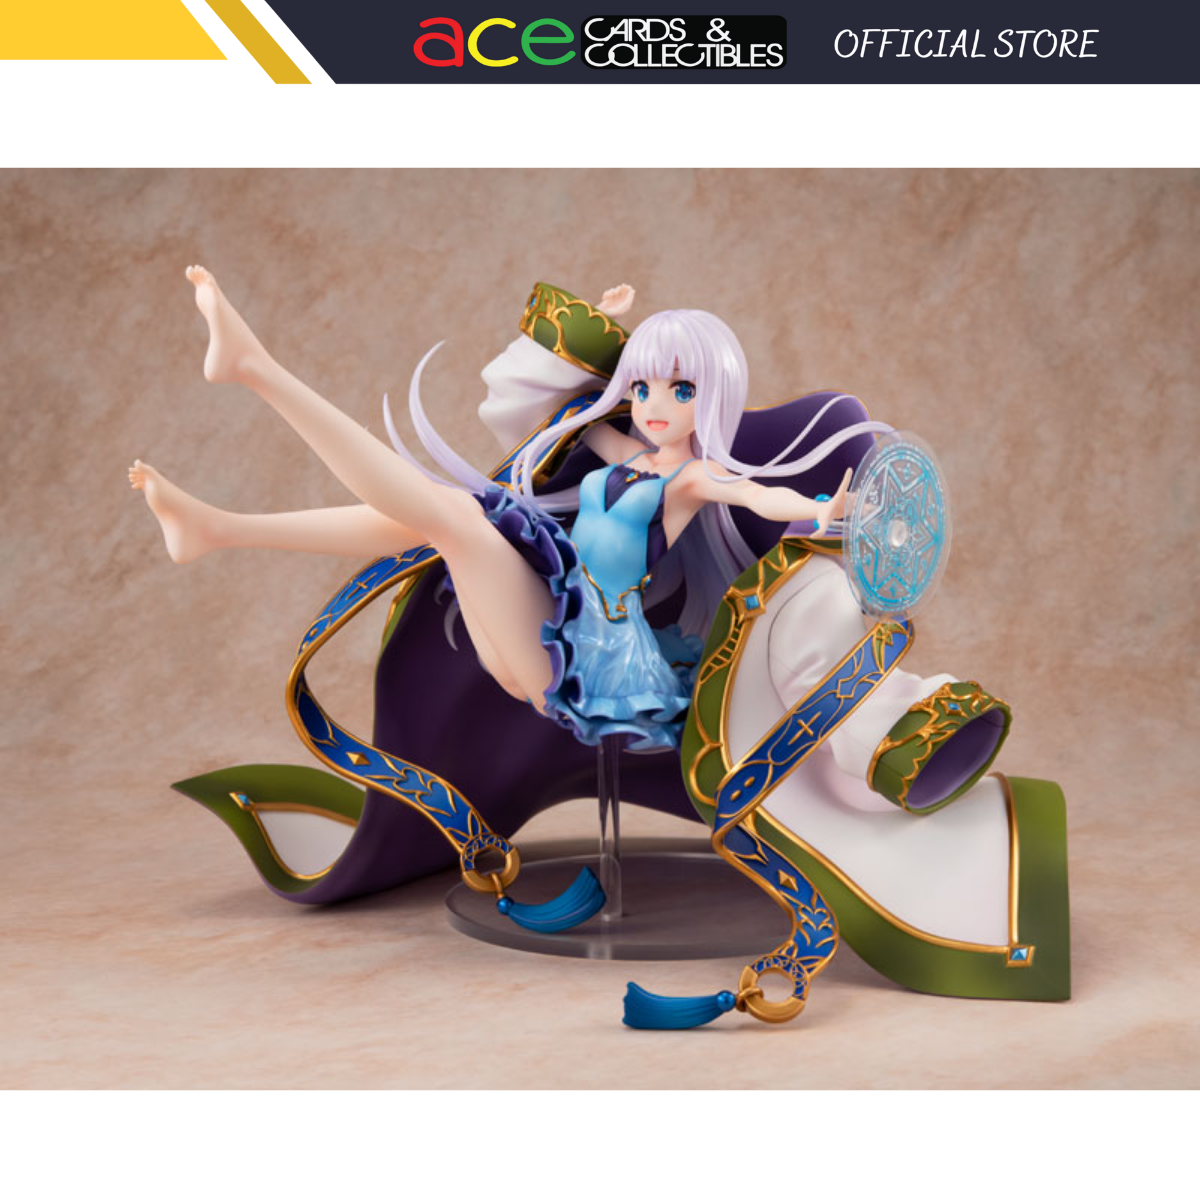 She Professed Herself Pupil Of The Wiseman 1/7 Scale Figure "Mira"-Good Smile Company-Ace Cards & Collectibles